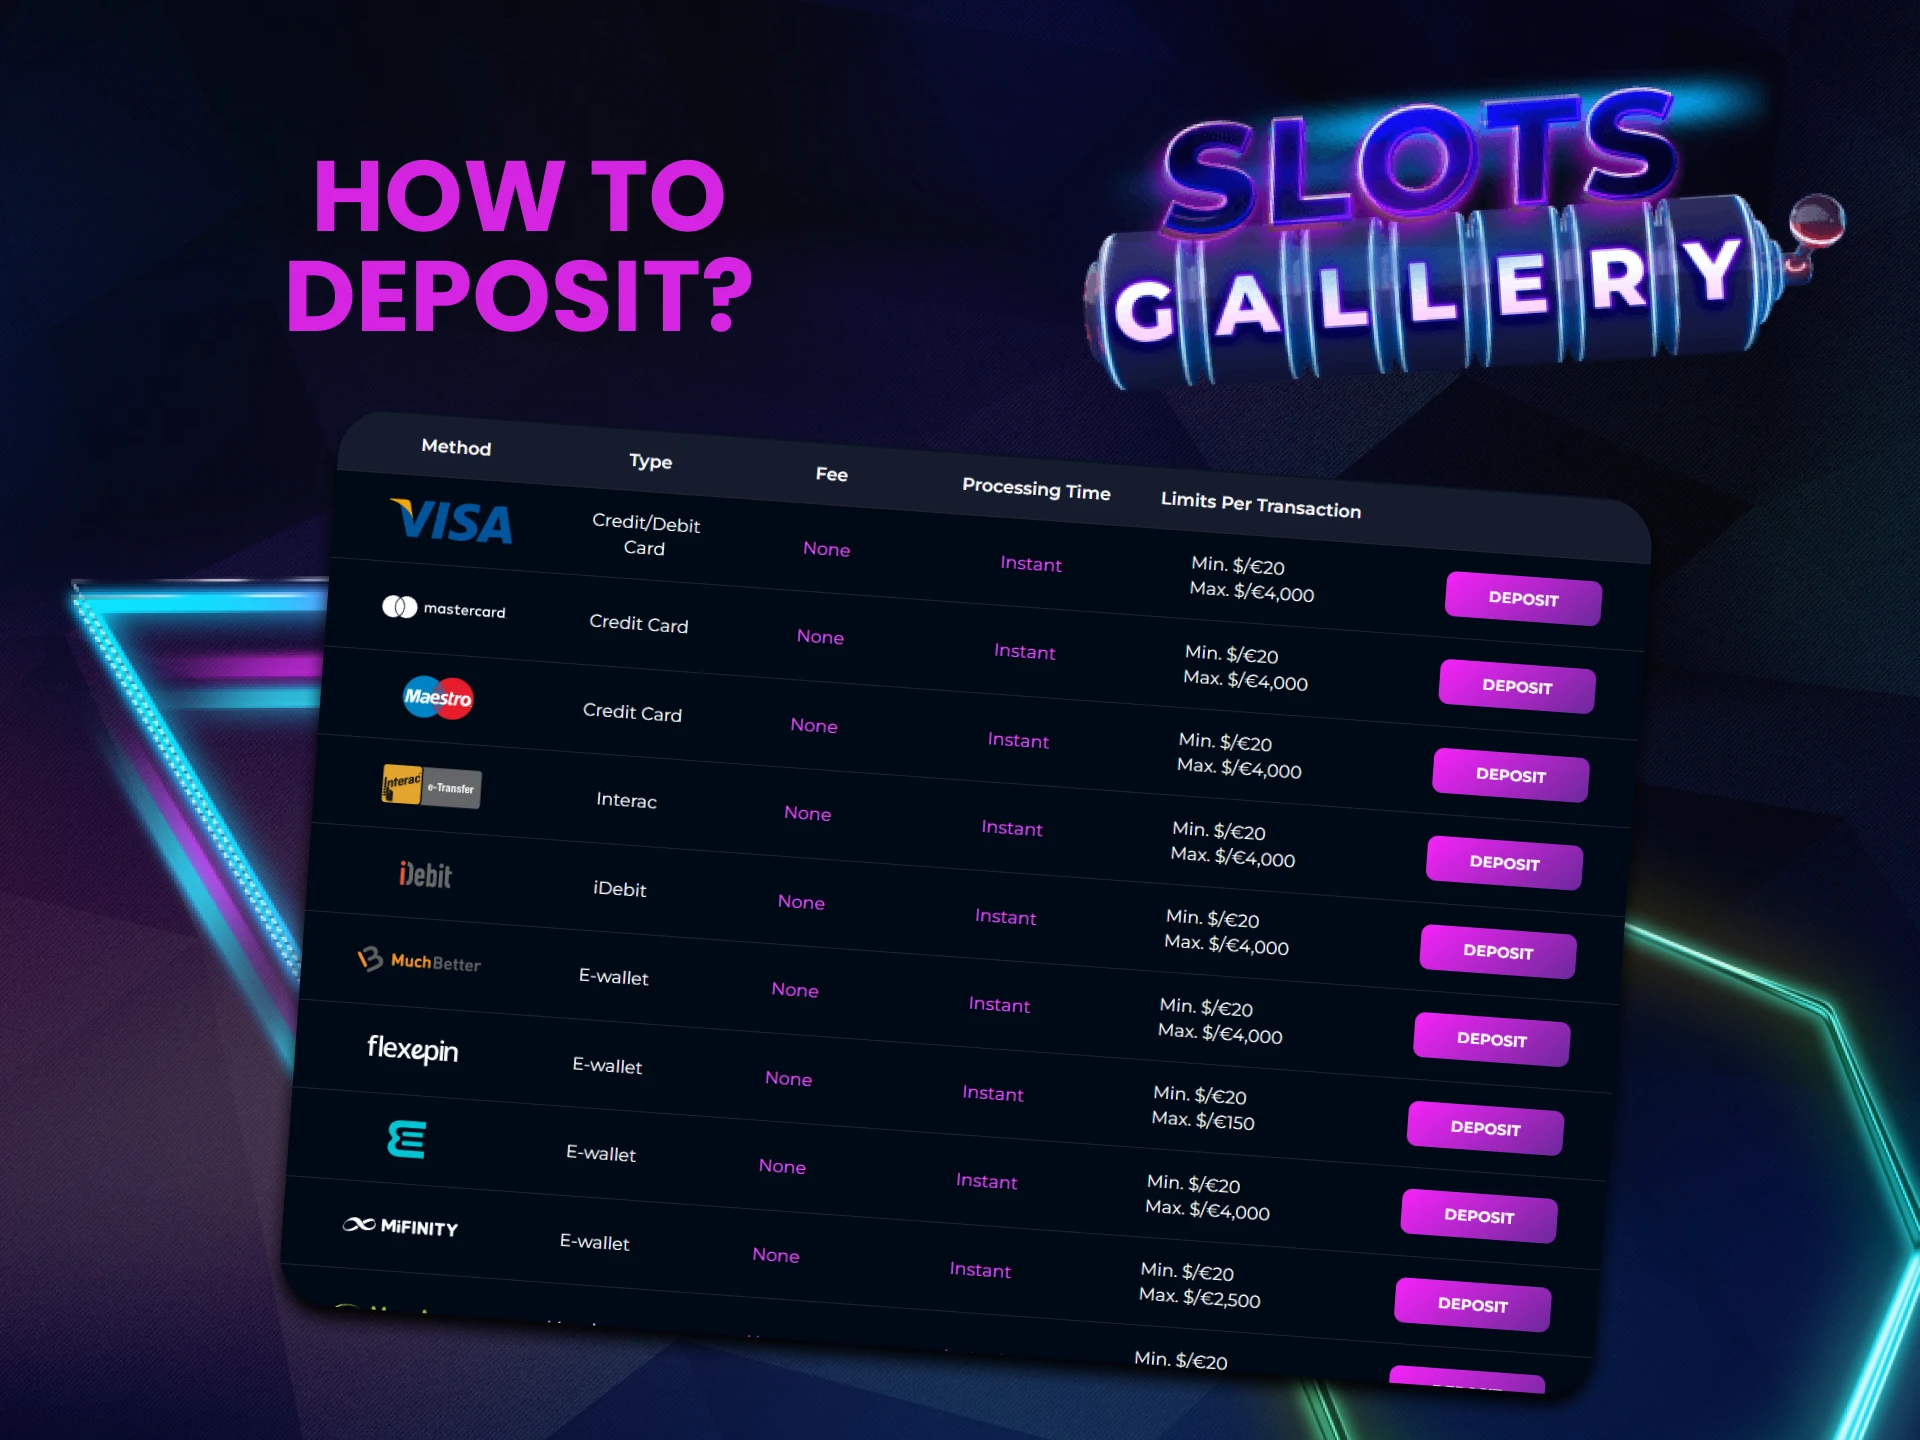 We will tell you how to top up funds on Slots Gallery.